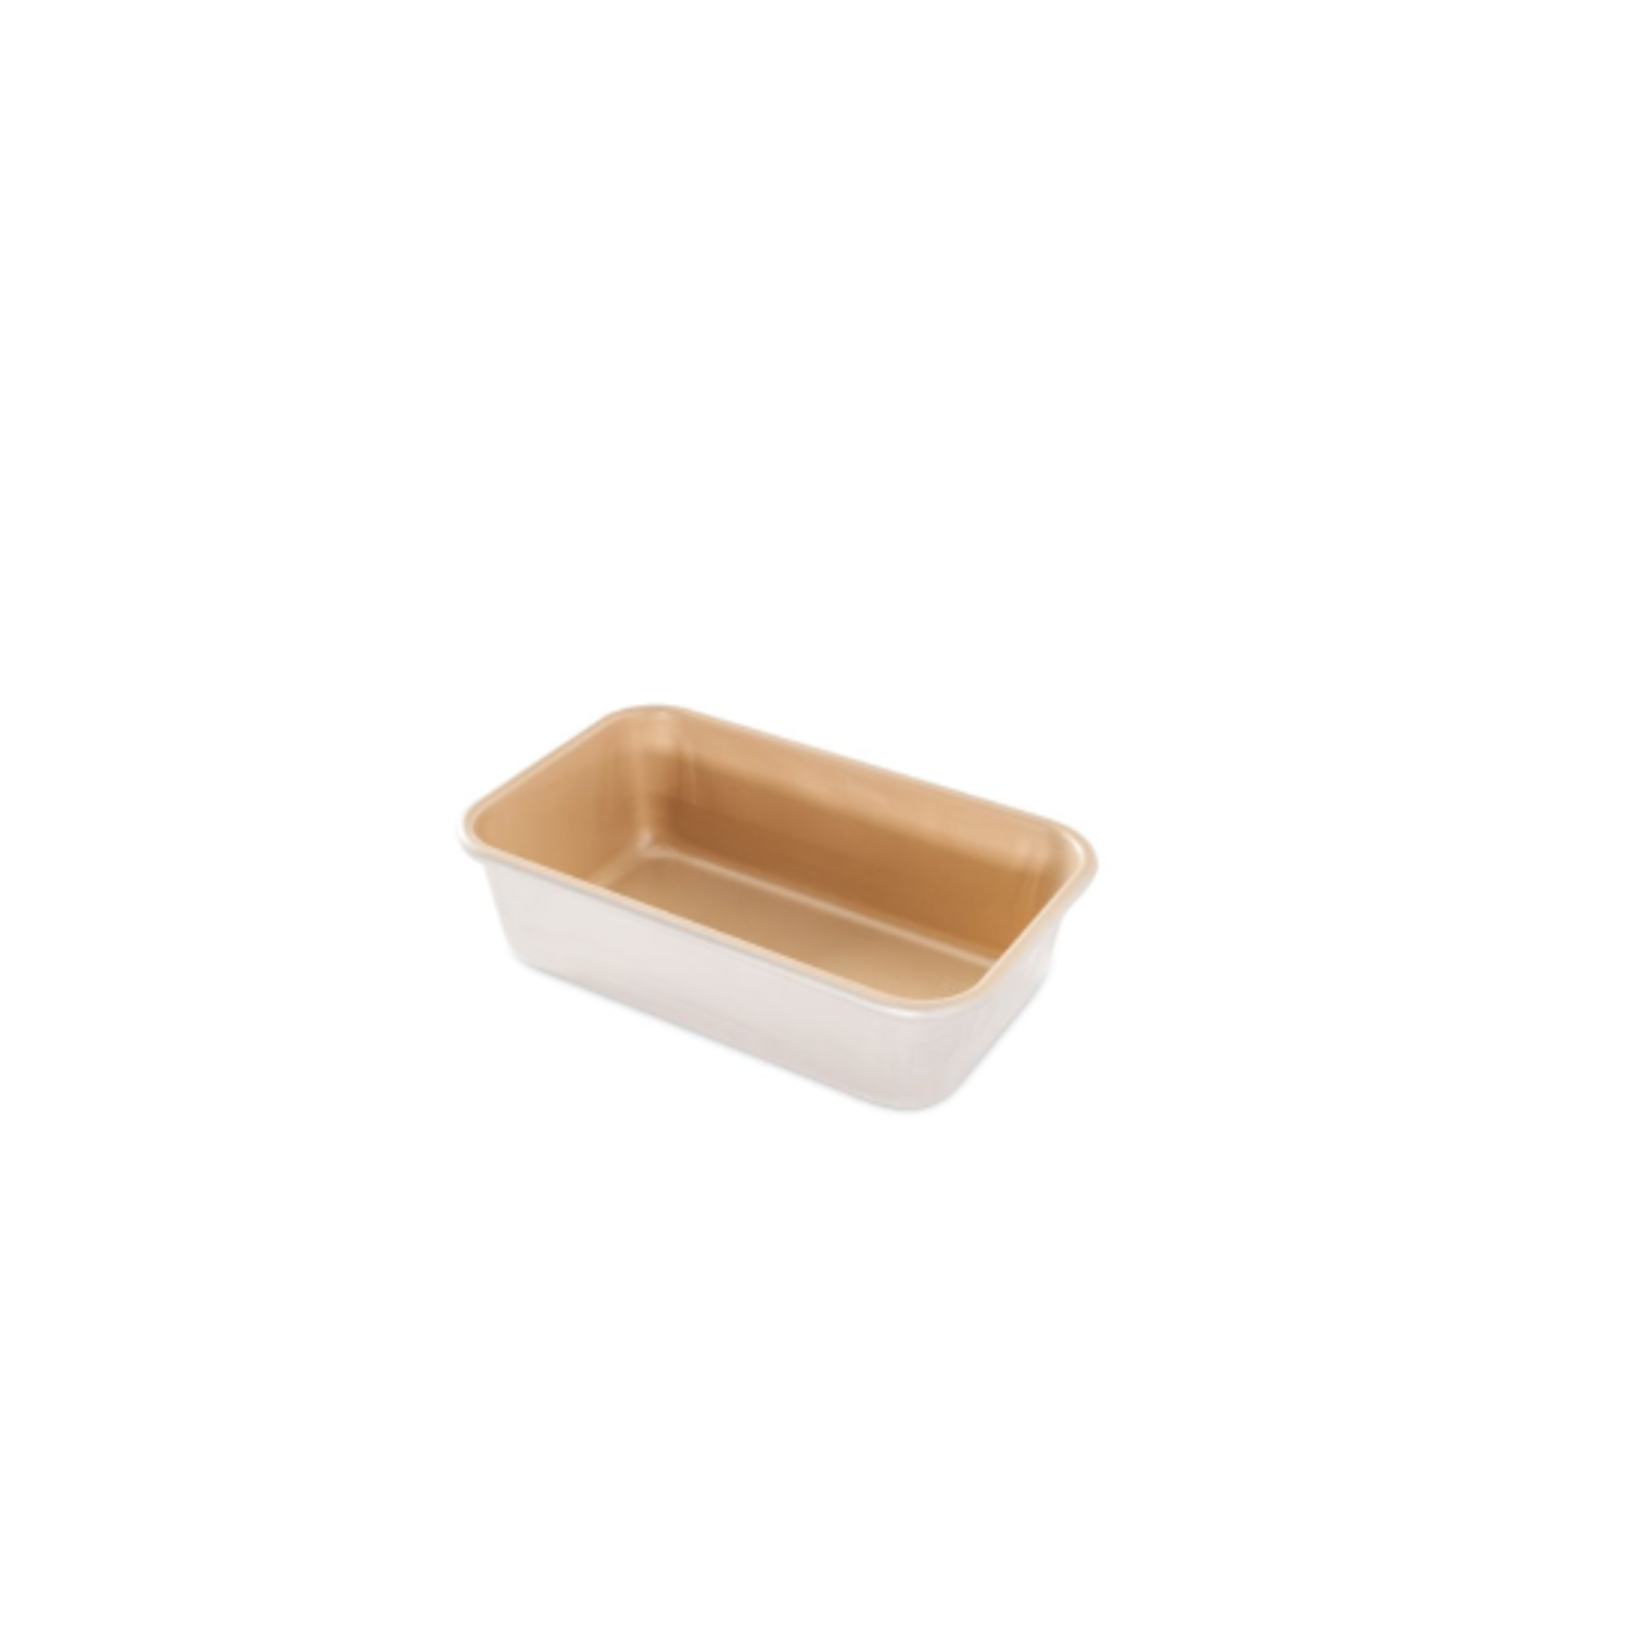 Nordicware Large 1.5lb Loaf Pan, Gold